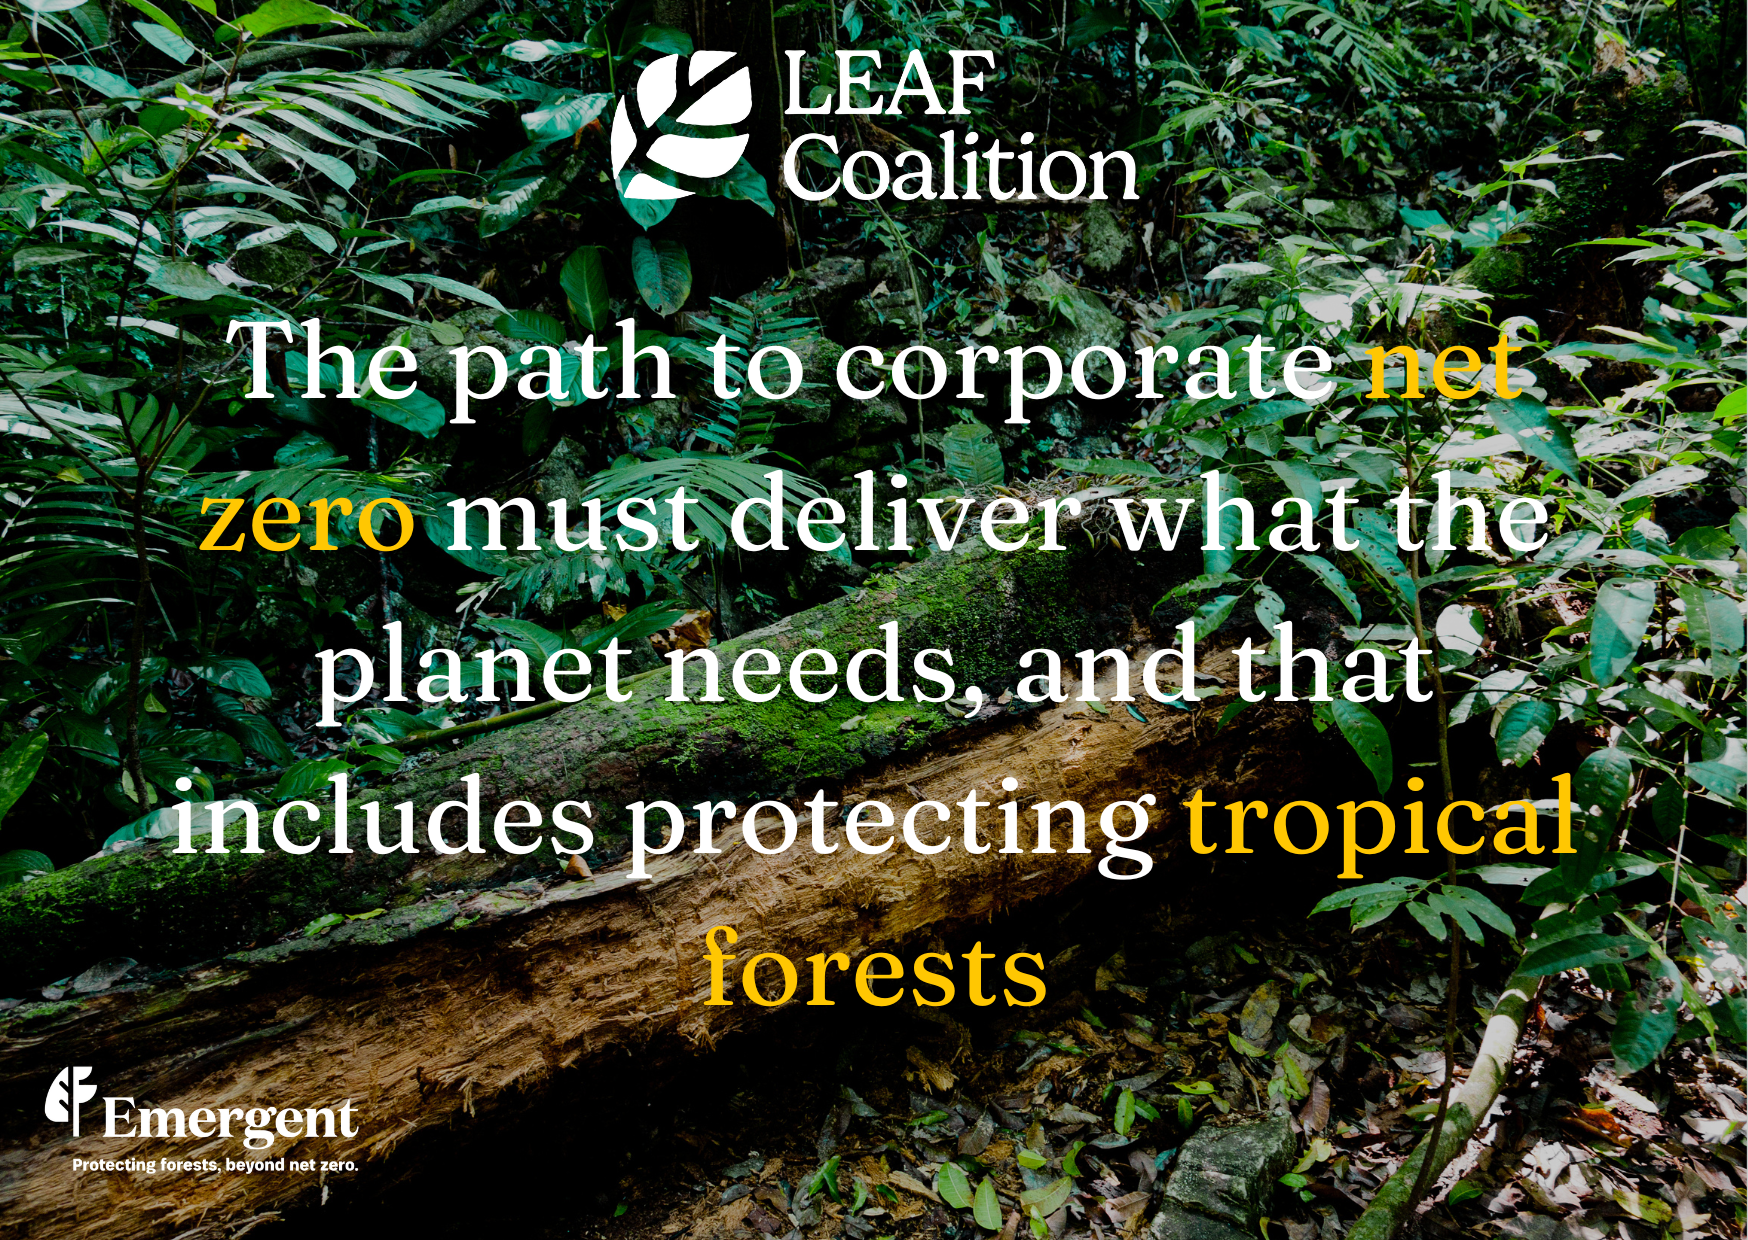 The path to corporate net zero must deliver what the planet needs, and that includes protecting tropical forests